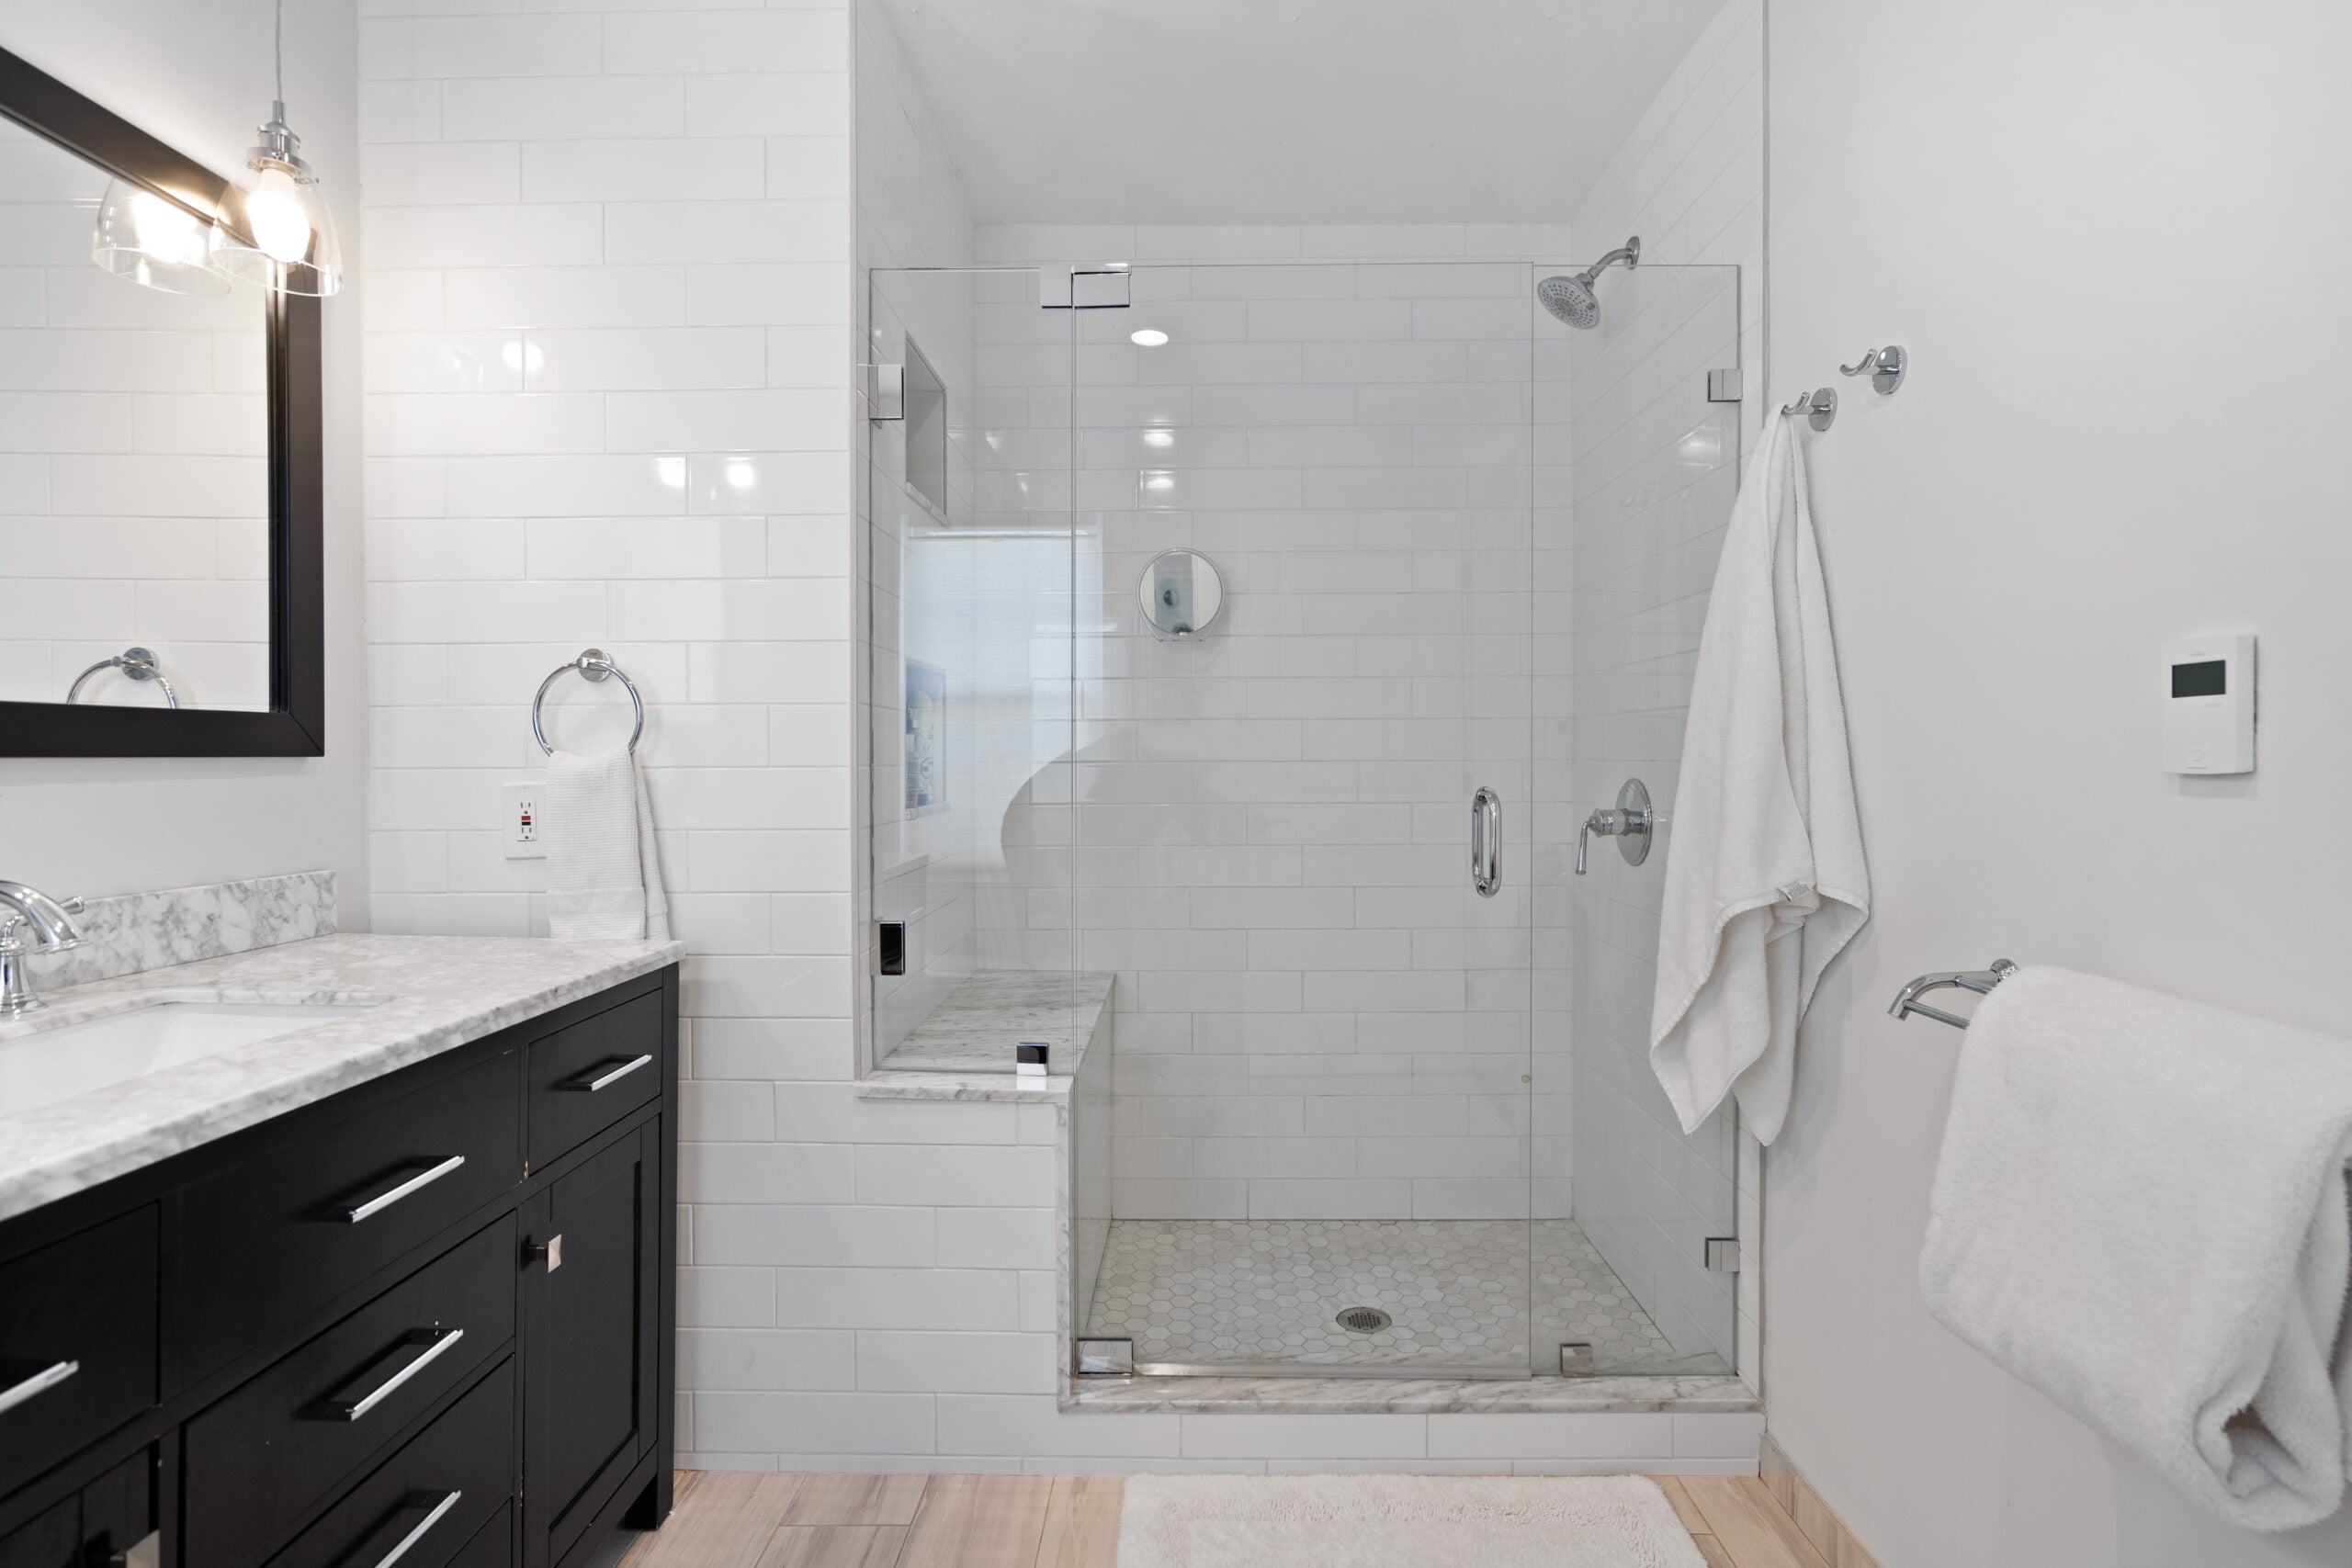 A long view of the room, with an espresso-colored vanity on the left under a rectangular mirror of the same hue. the vanity is topped with a marbled quartz. The wall next to and in the shower is subway tile. The shower has a clear glass door. The flooring is a light-colored tile. The walls are white. There is a towel rack on the far right.